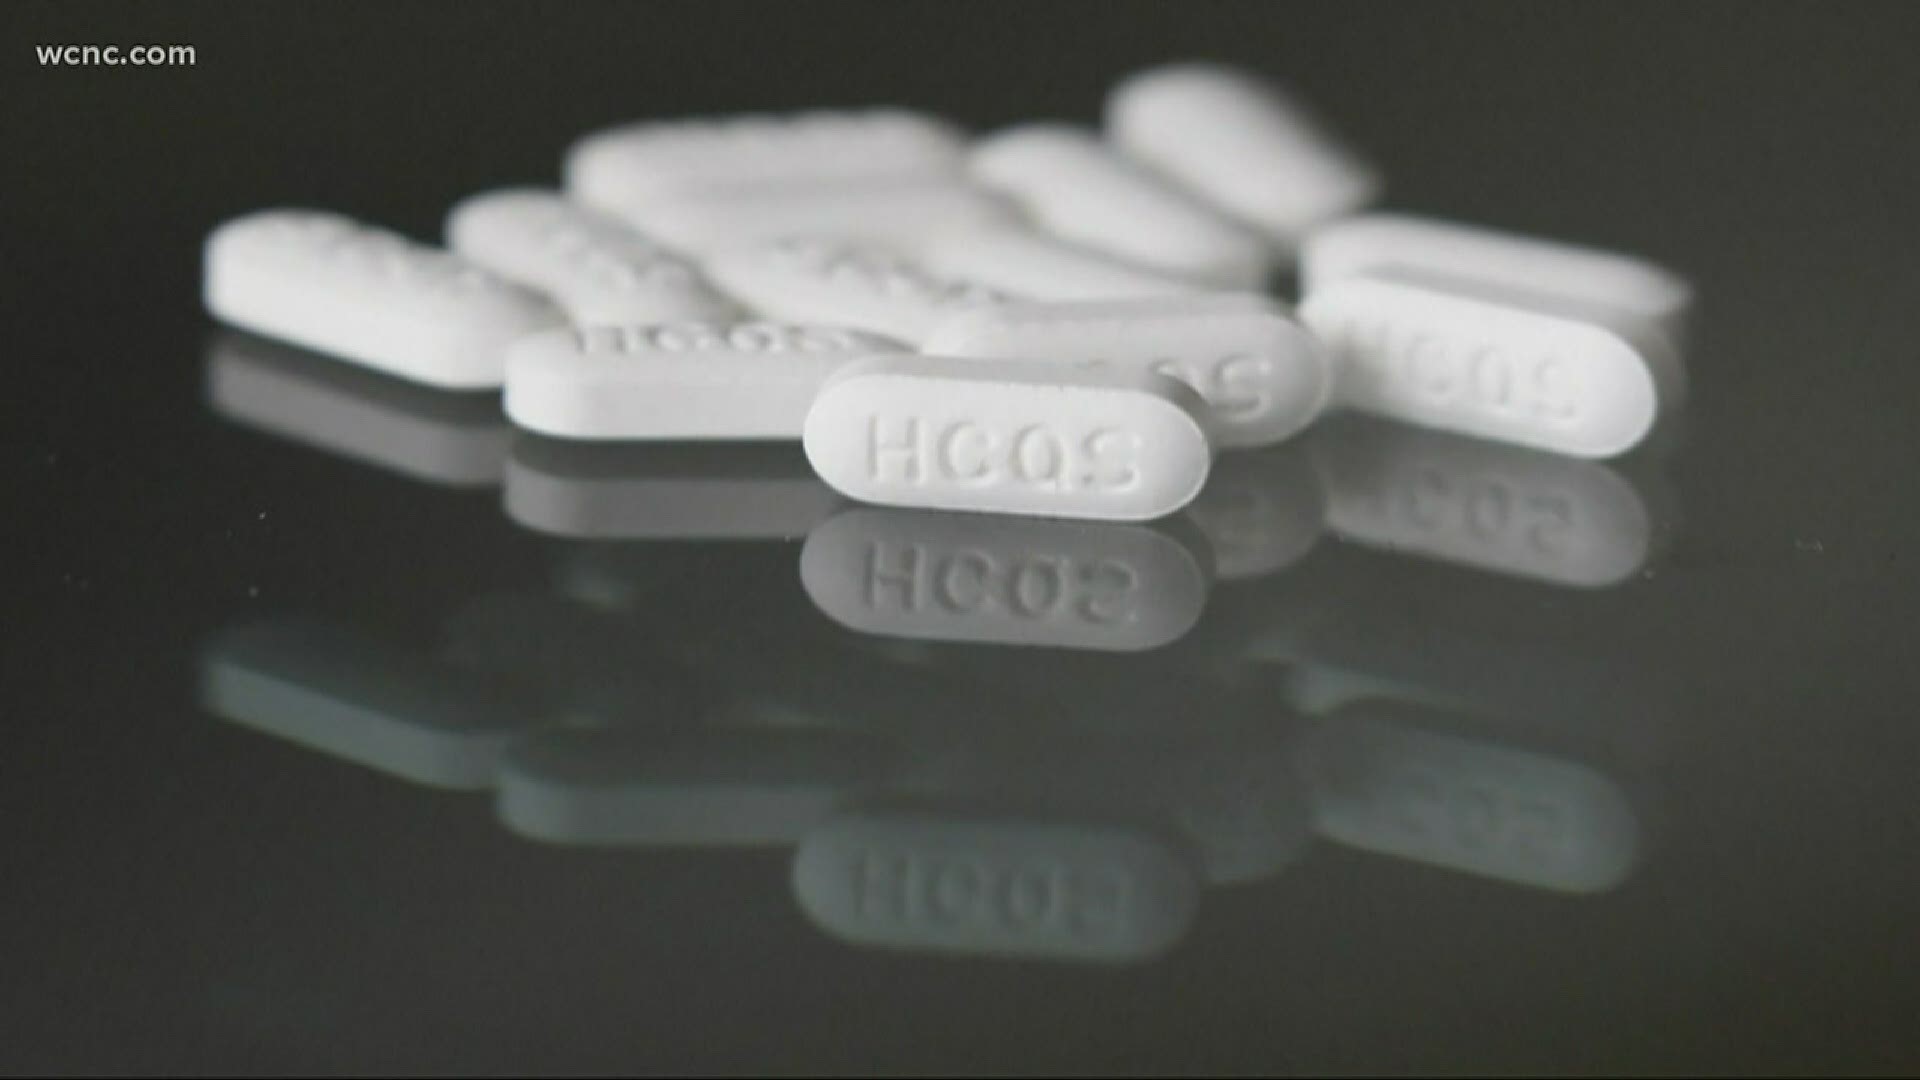 Scammers are claiming they have medication to protect against or treat coronavirus.